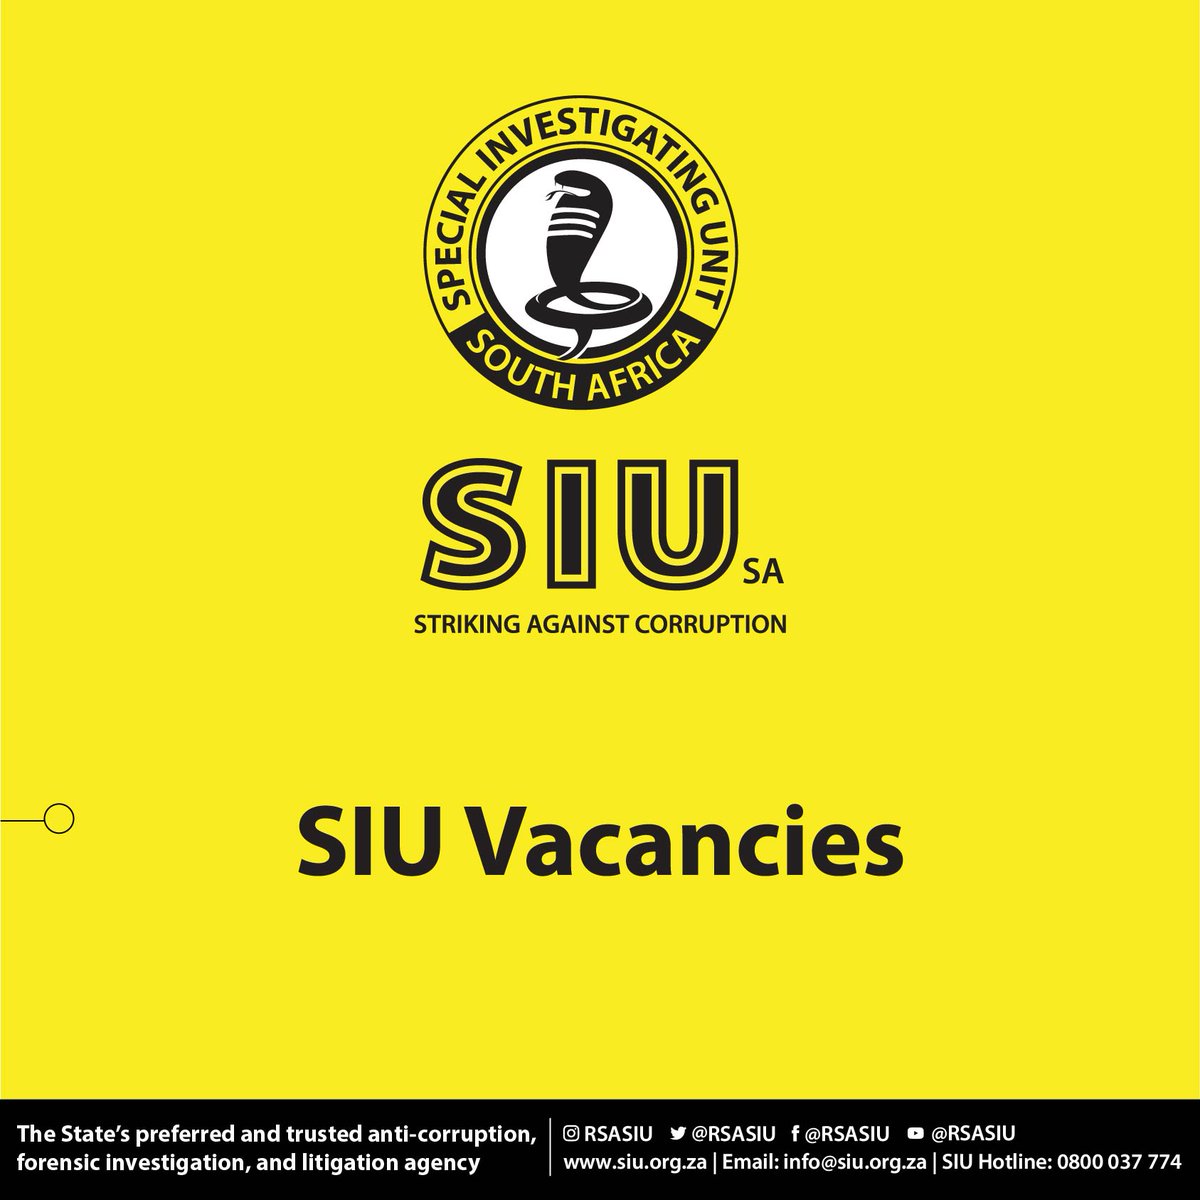 #JobSeekersSA| The SIU is seeking to hire an Independent Actuary Contract based at our Head office in Pretoria for three years. For more information and to apply, click here: bit.ly/IC240501